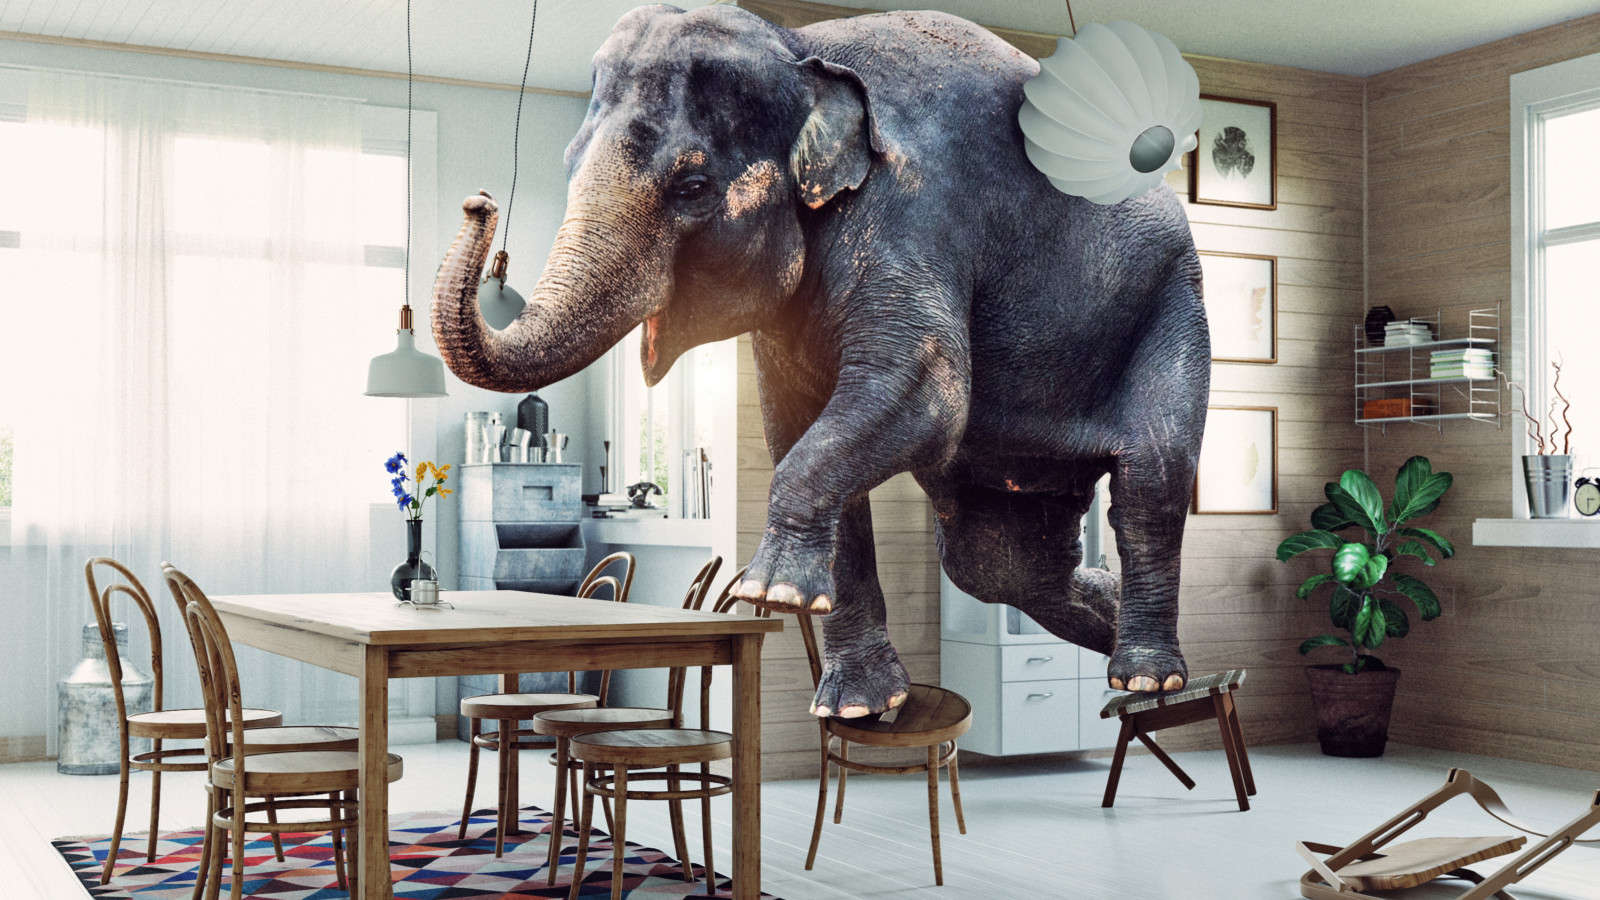 Taming the elephant in the room